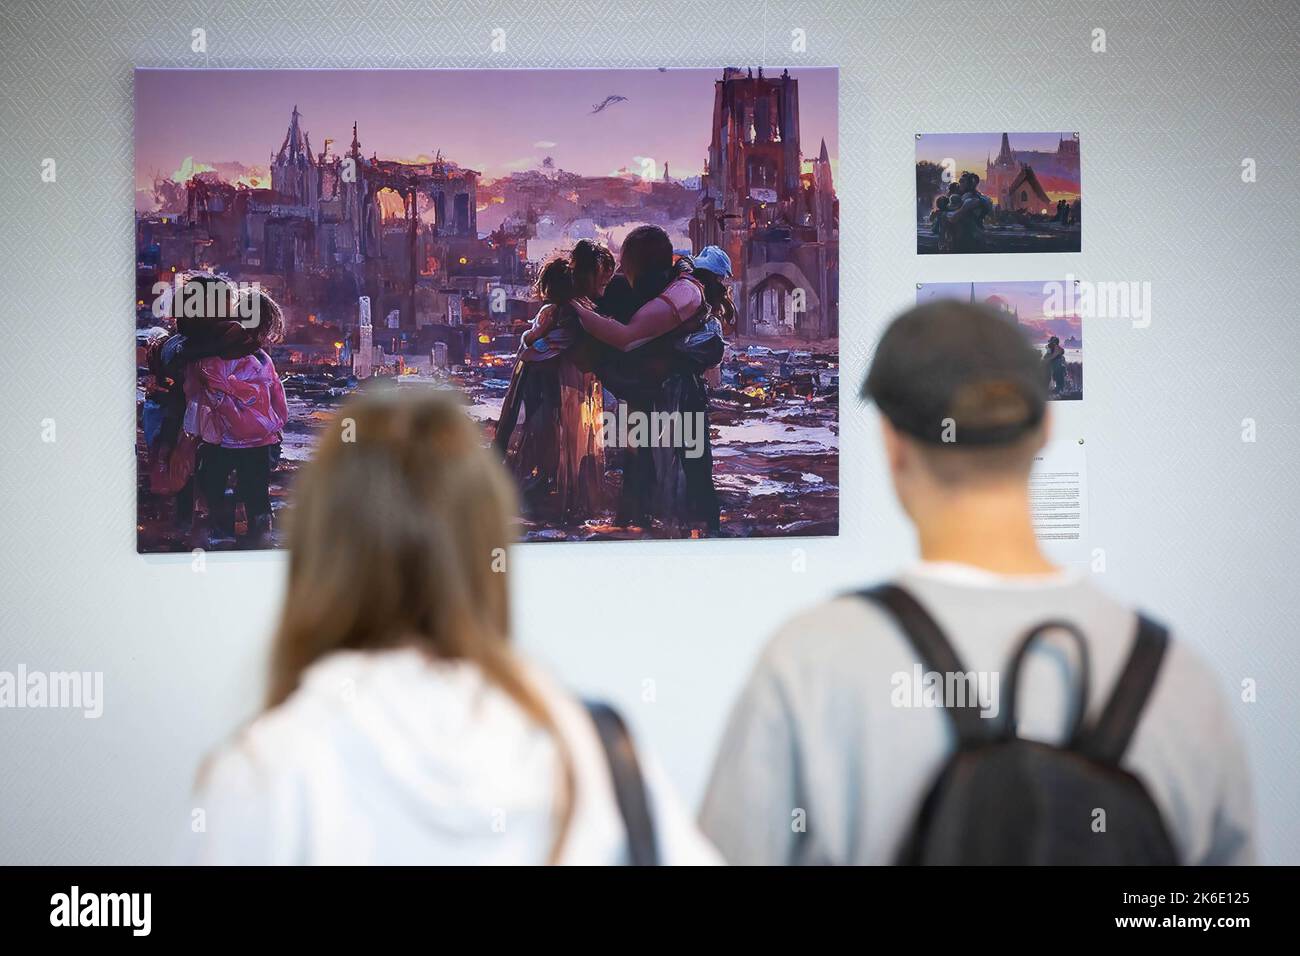 People look at an image generated based on the stories of displaced children during the evacuation from hot spots in the south-east of Ukraine in Kyiv. The exhibition of these pictures is called 'Save Ukr(AI)ne'. On February 2022 Russian troops invaded Ukrainian territory starting a conflict that has provoked destruction and a humanitarian crisis. Stock Photo